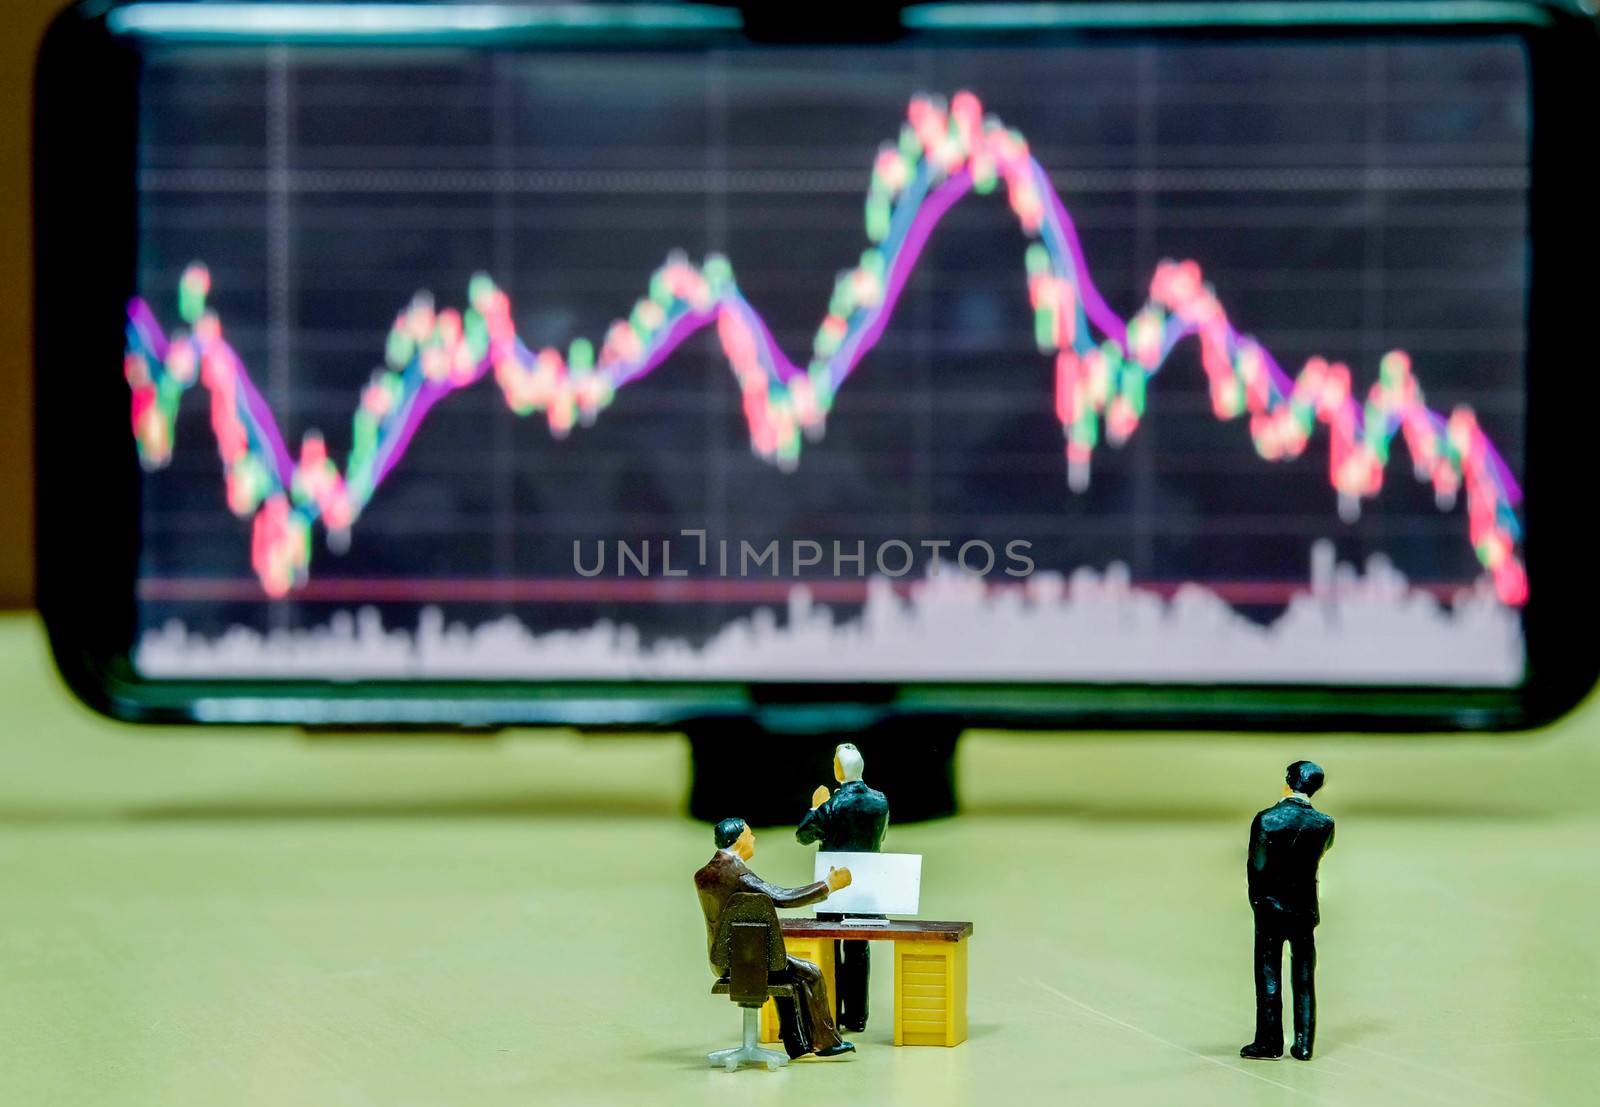 Miniature figure business people or Stock Trader looking at Blur Stock board for Graph Analysis